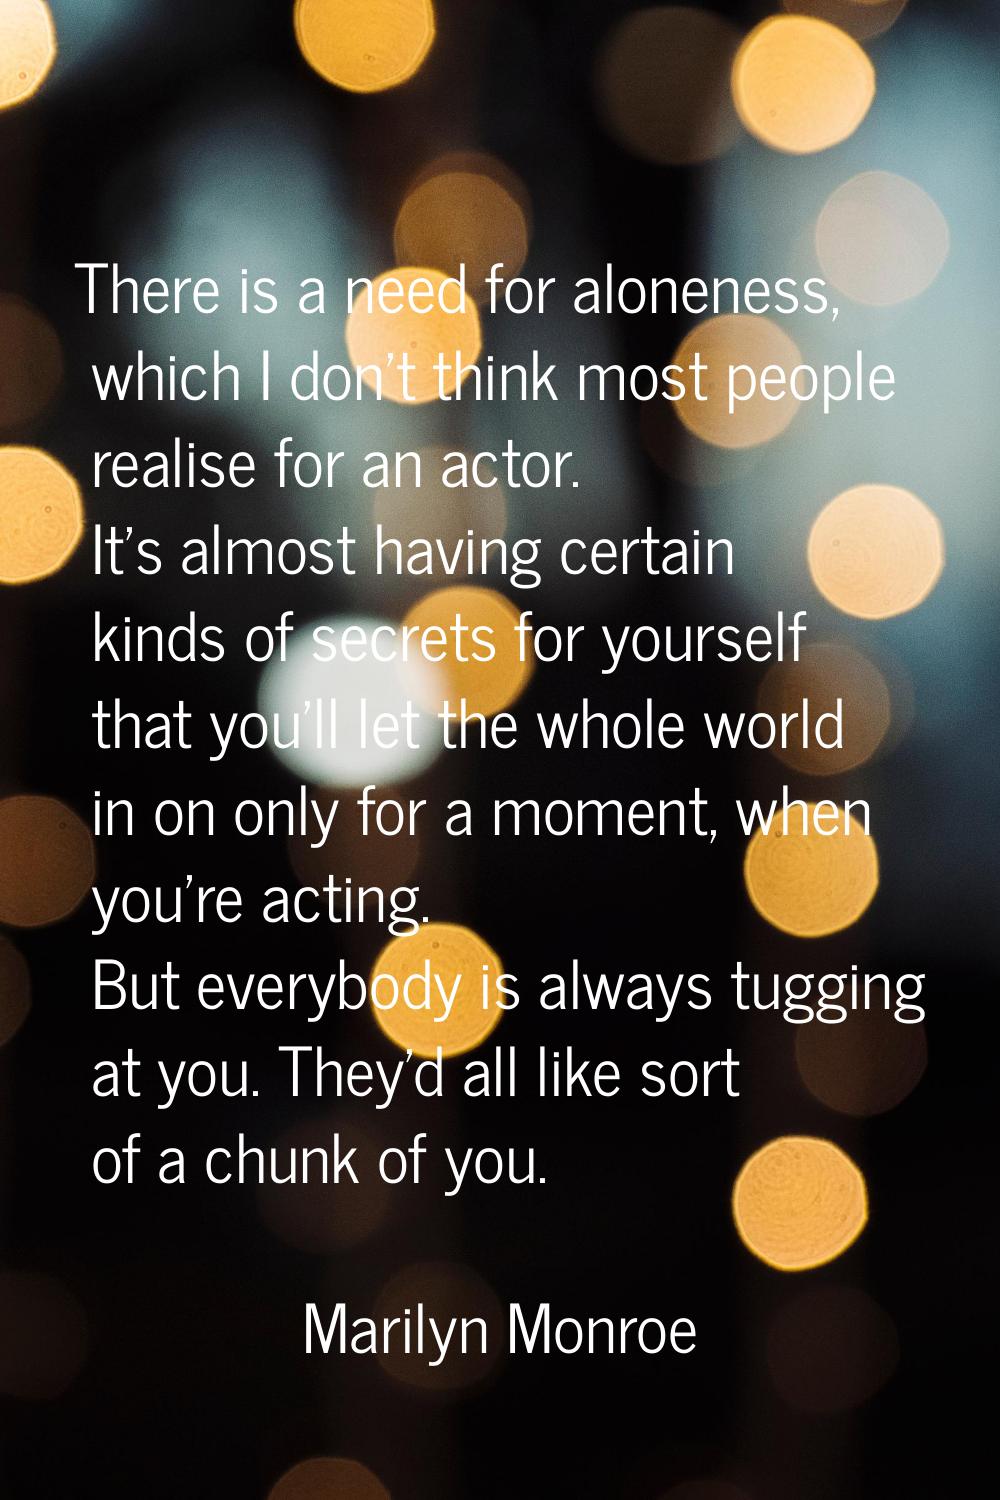 There is a need for aloneness, which I don't think most people realise for an actor. It's almost ha